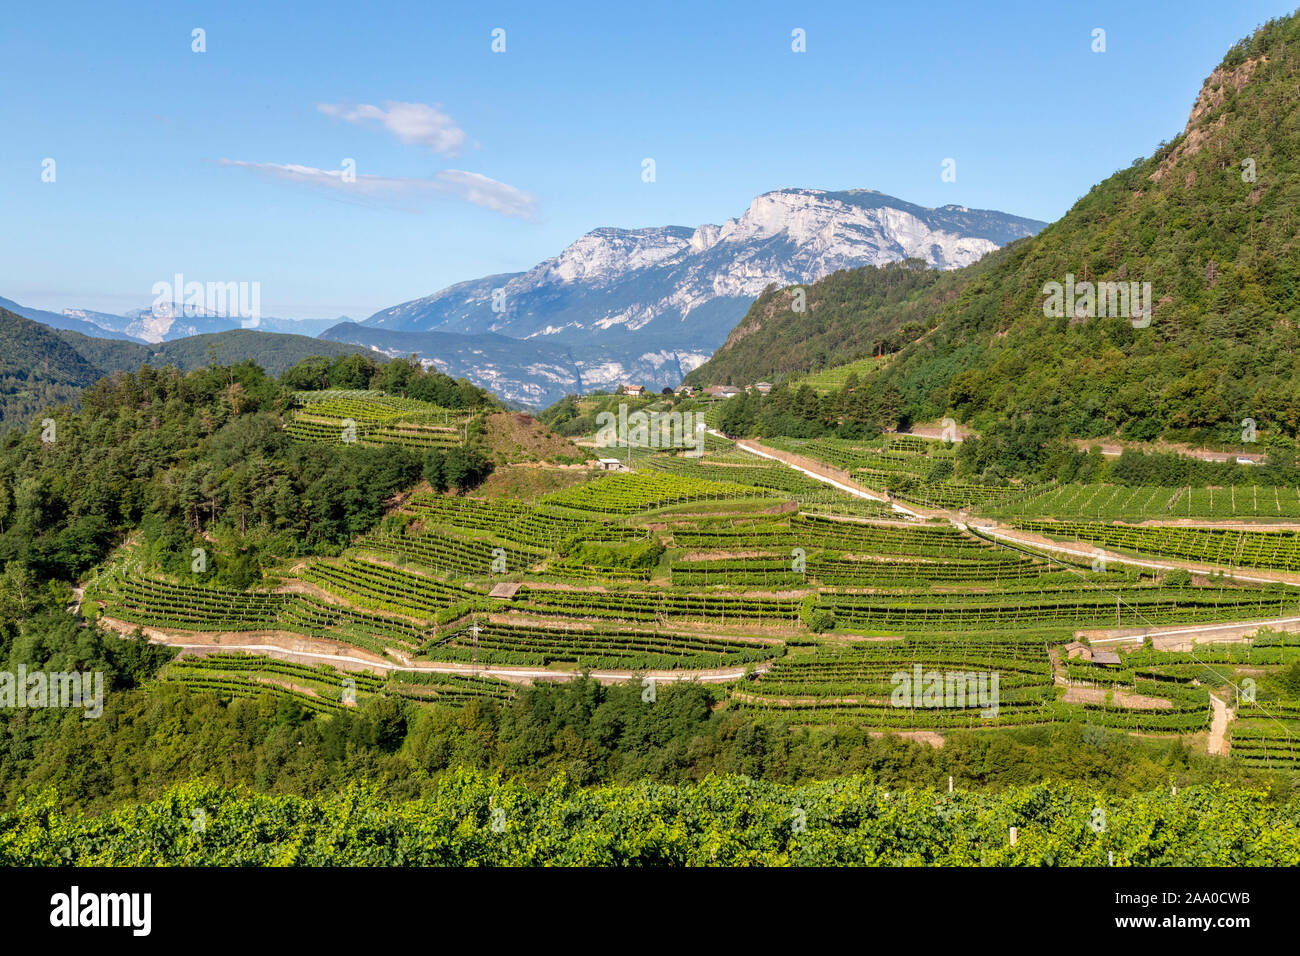 Green, stepped terraces where vineyards are grown forming a beautiful landscape Stock Photo